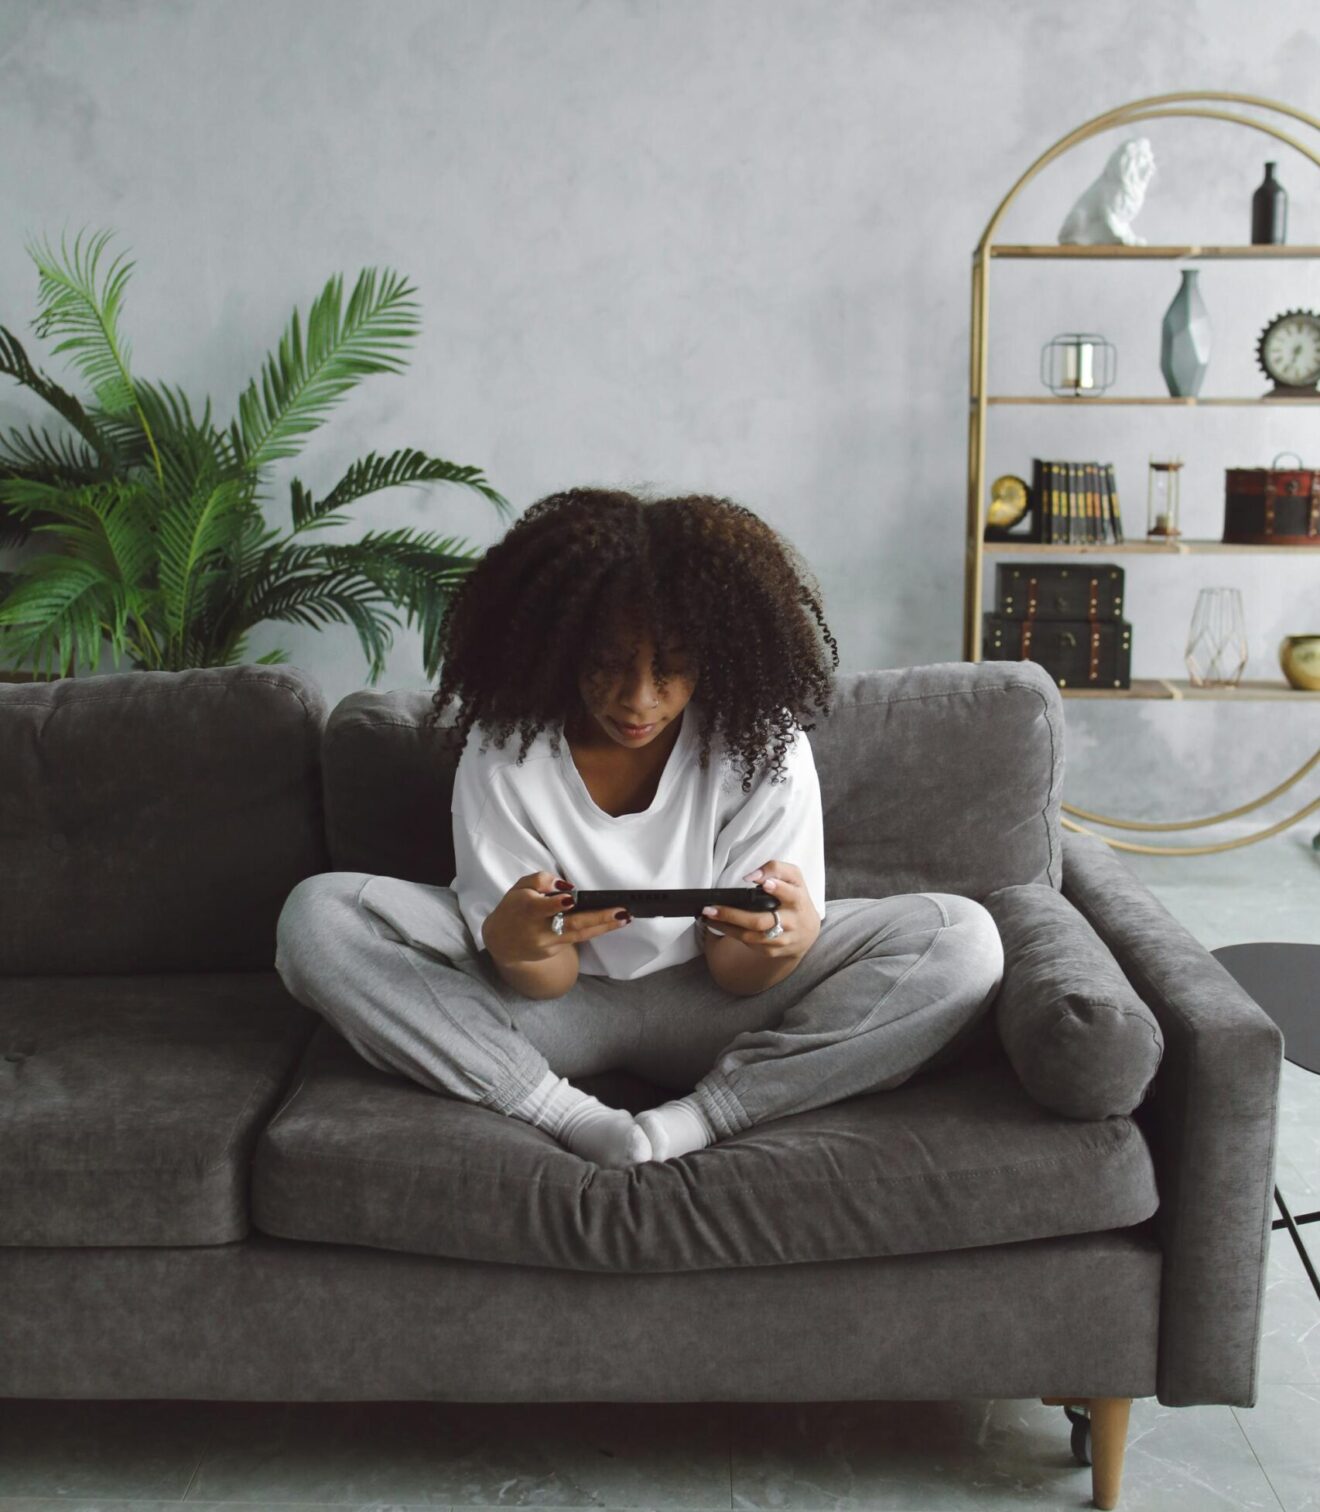 A young Black woman sits on a couch playing a handheld video game.